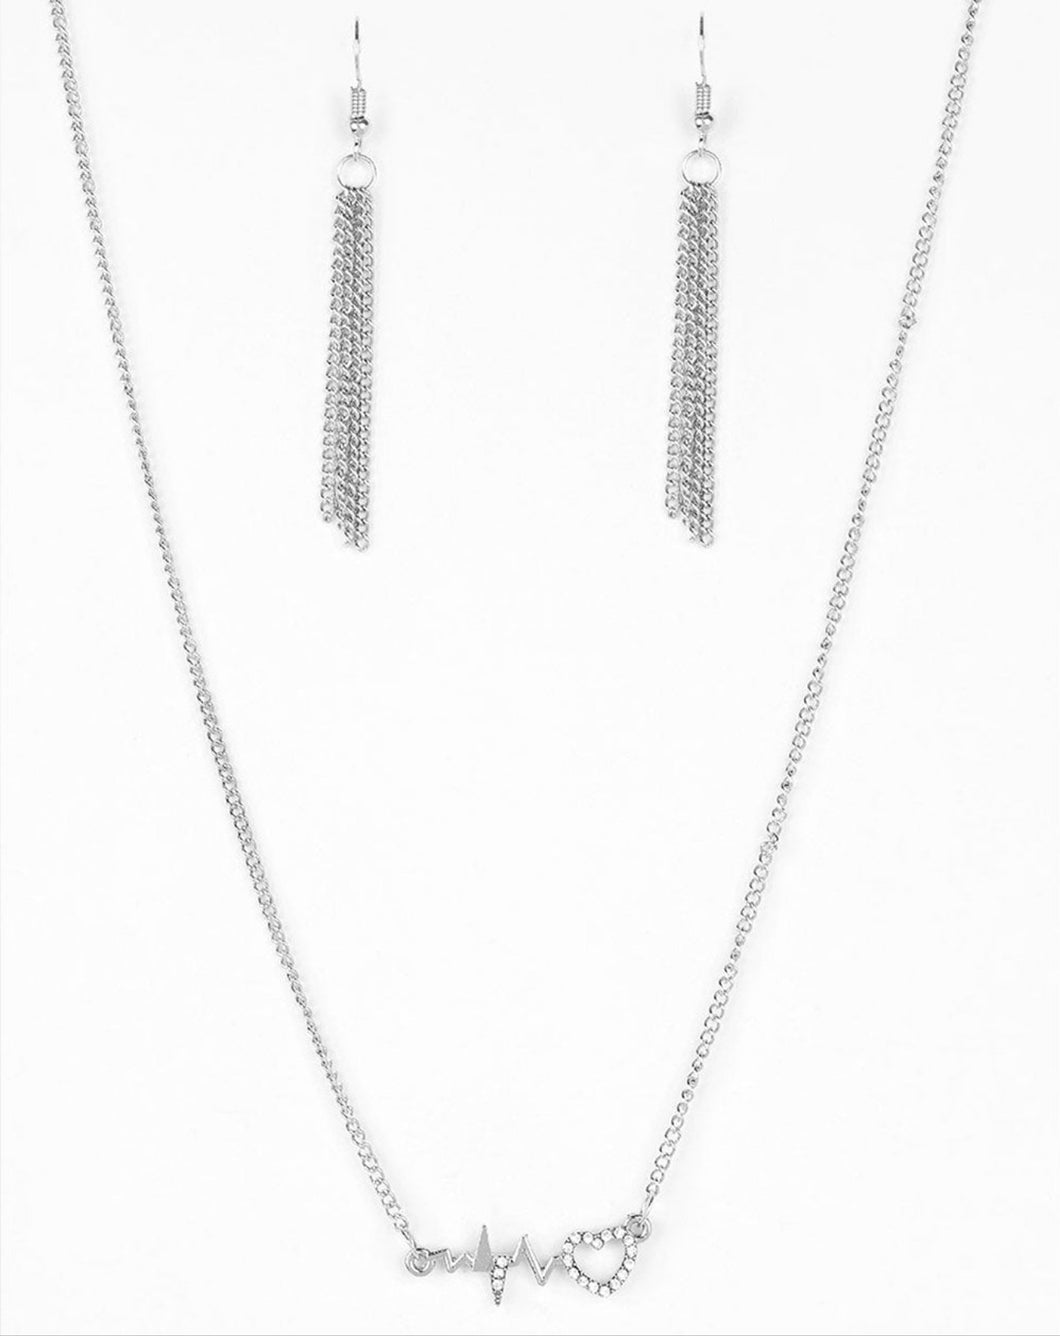 HEARTBEAT Street Silver and Bling Necklace and Earrings